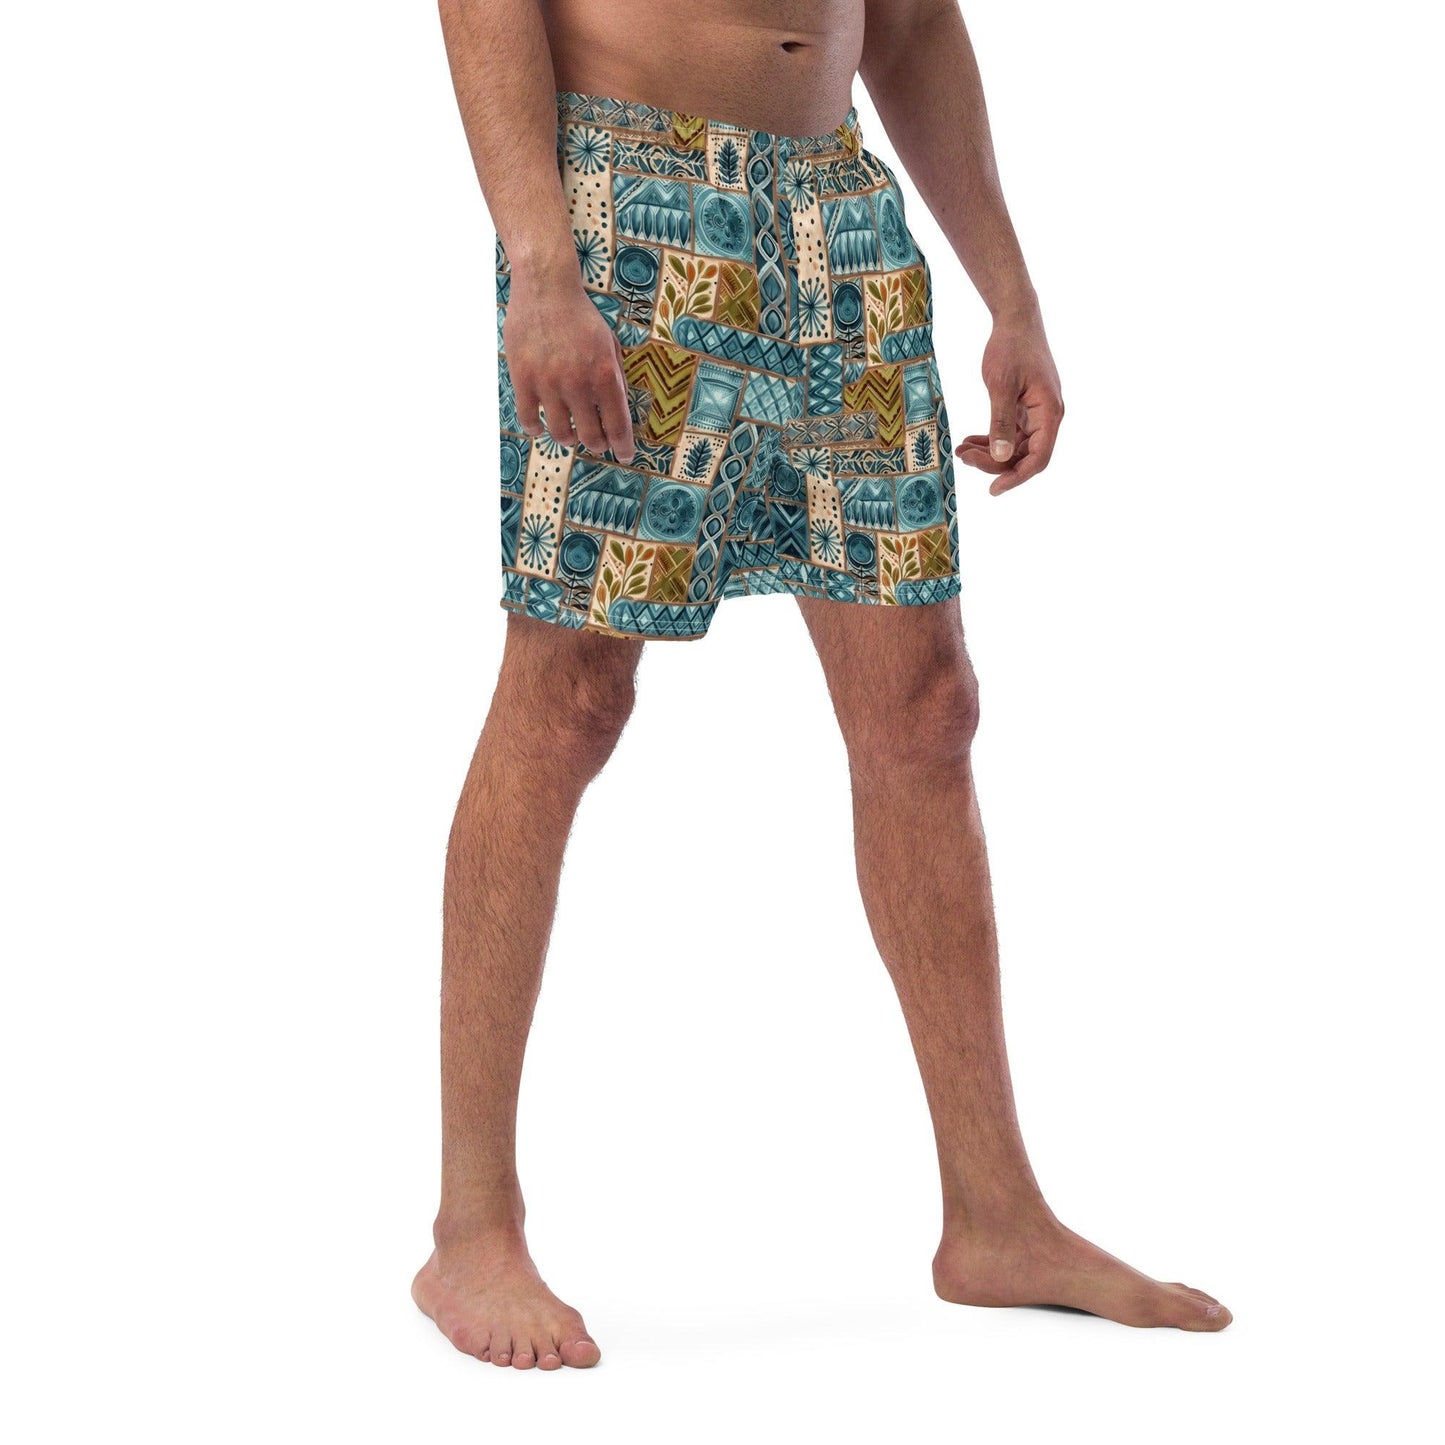 Pacific Islands Tapa Cloth Recycled Men's Swim Trunks - The Global Wanderer